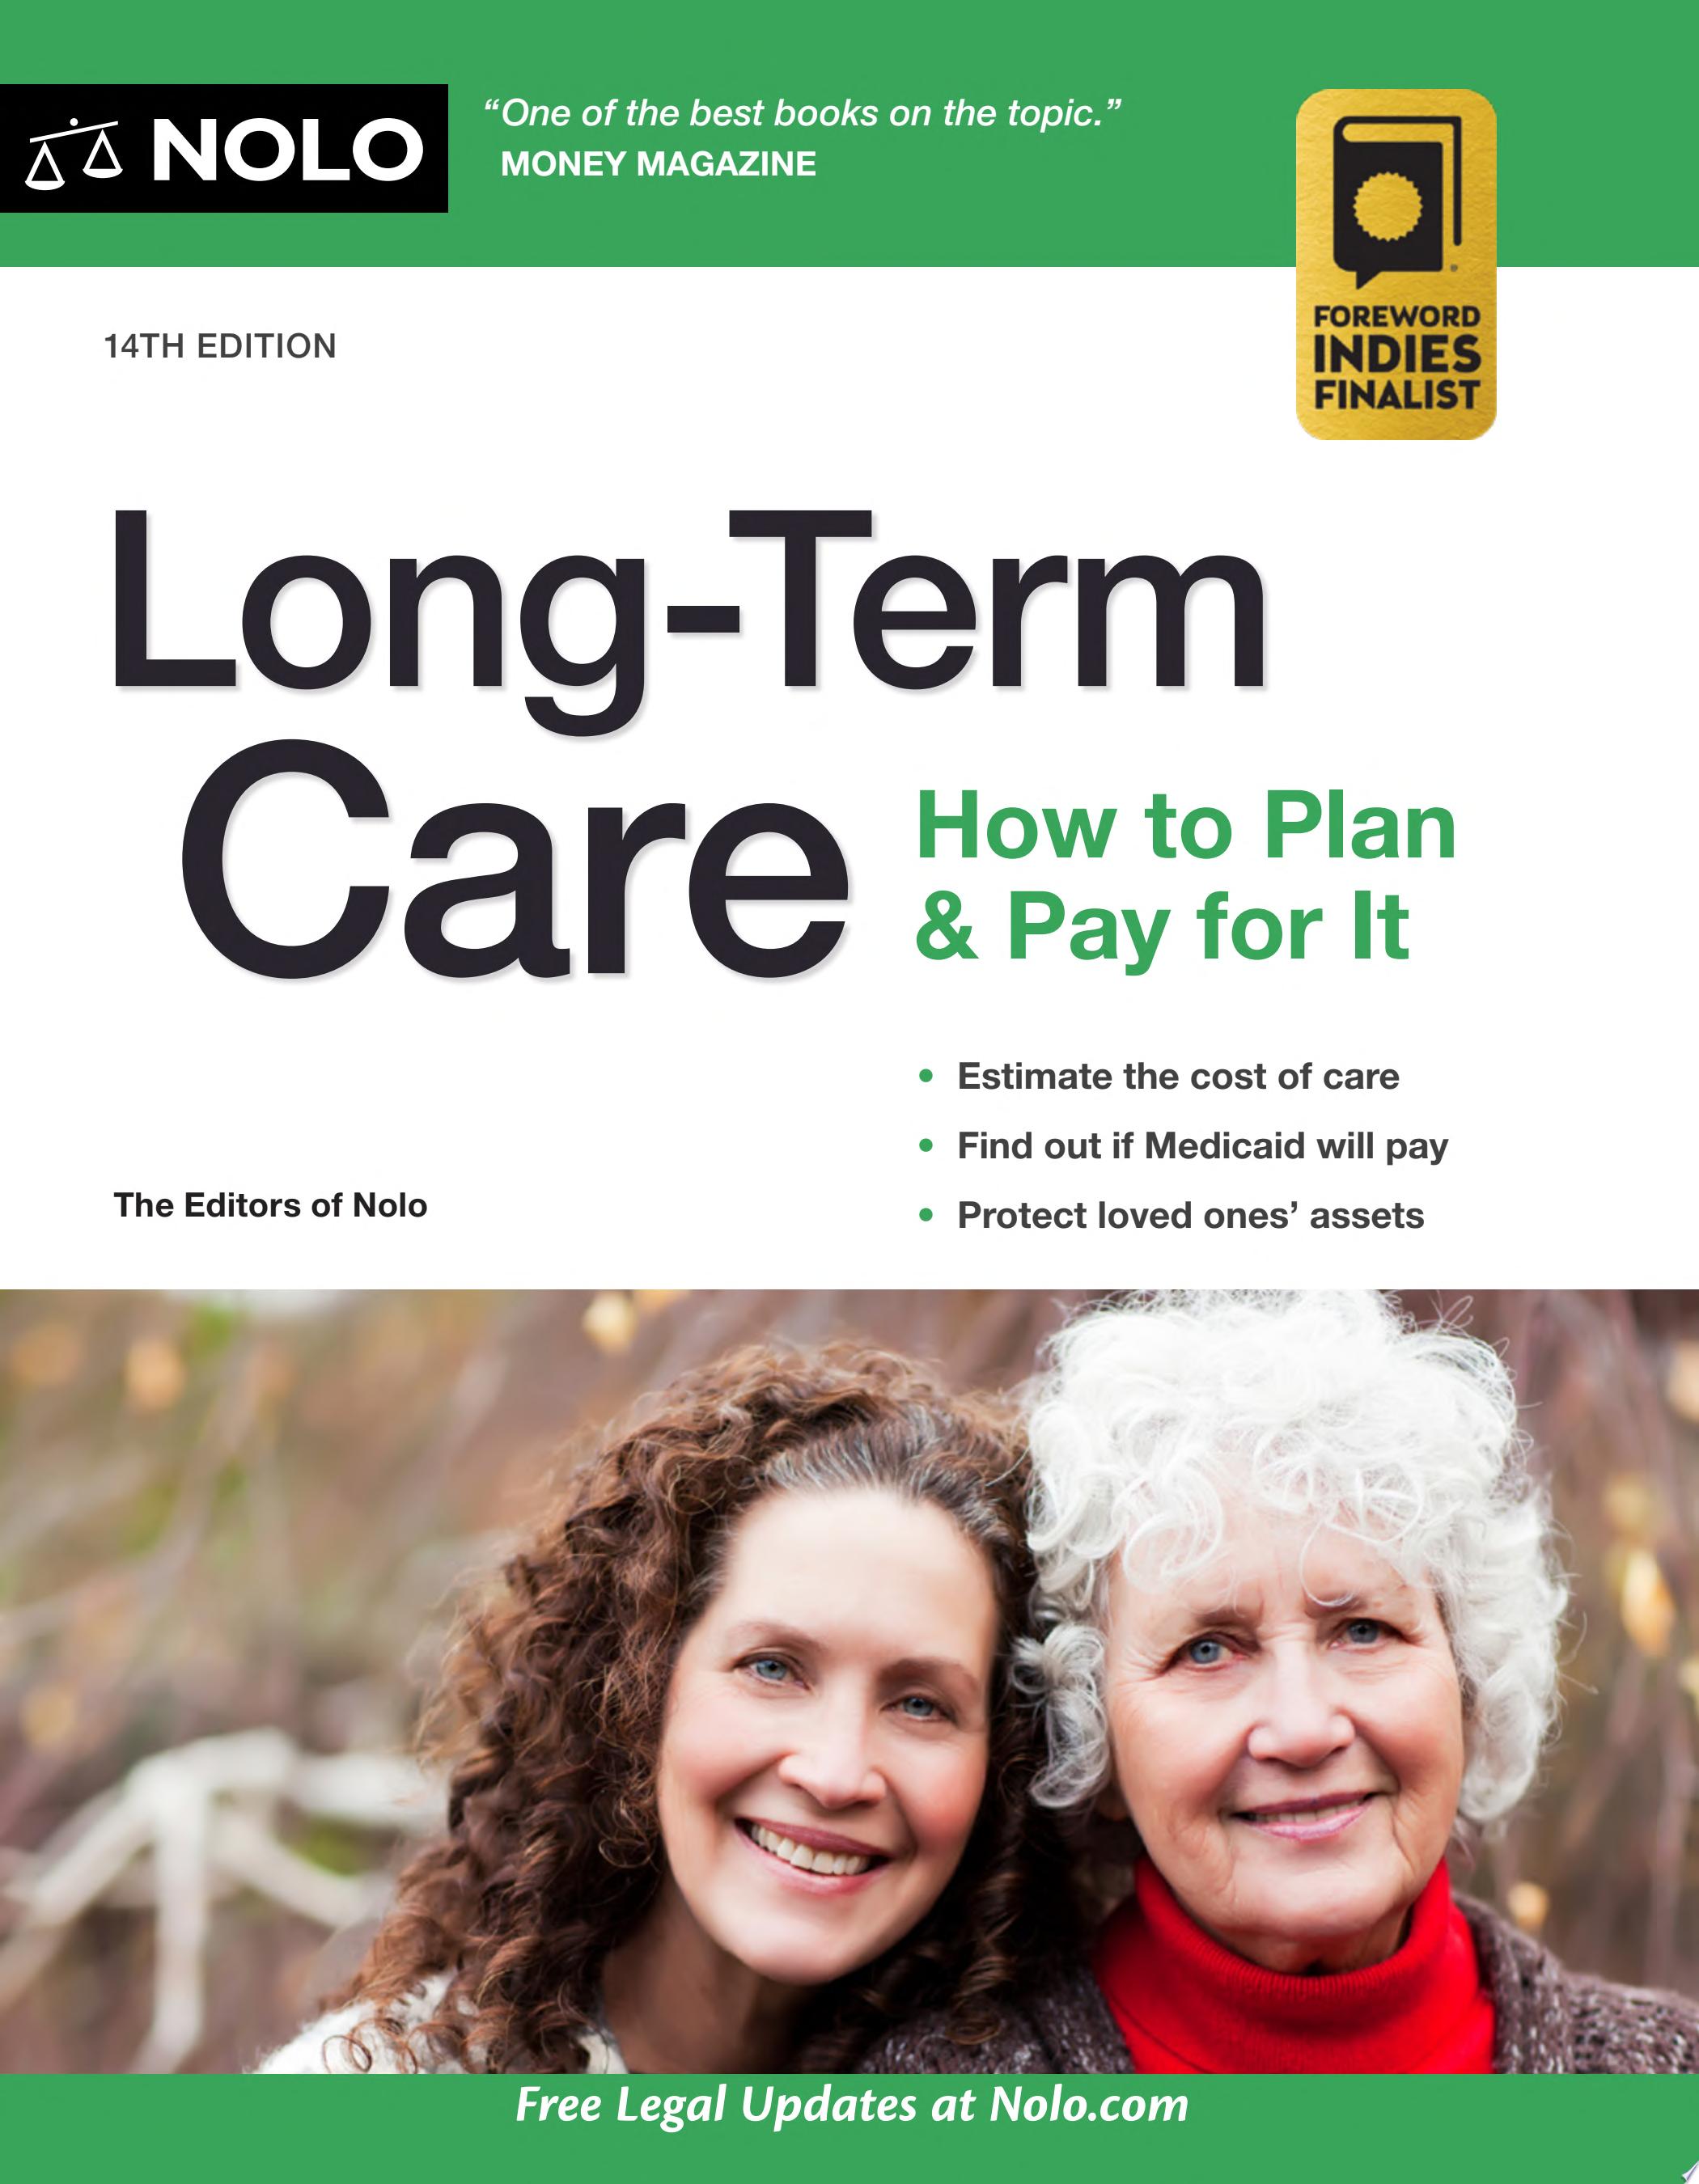 Image for "Long-Term Care"